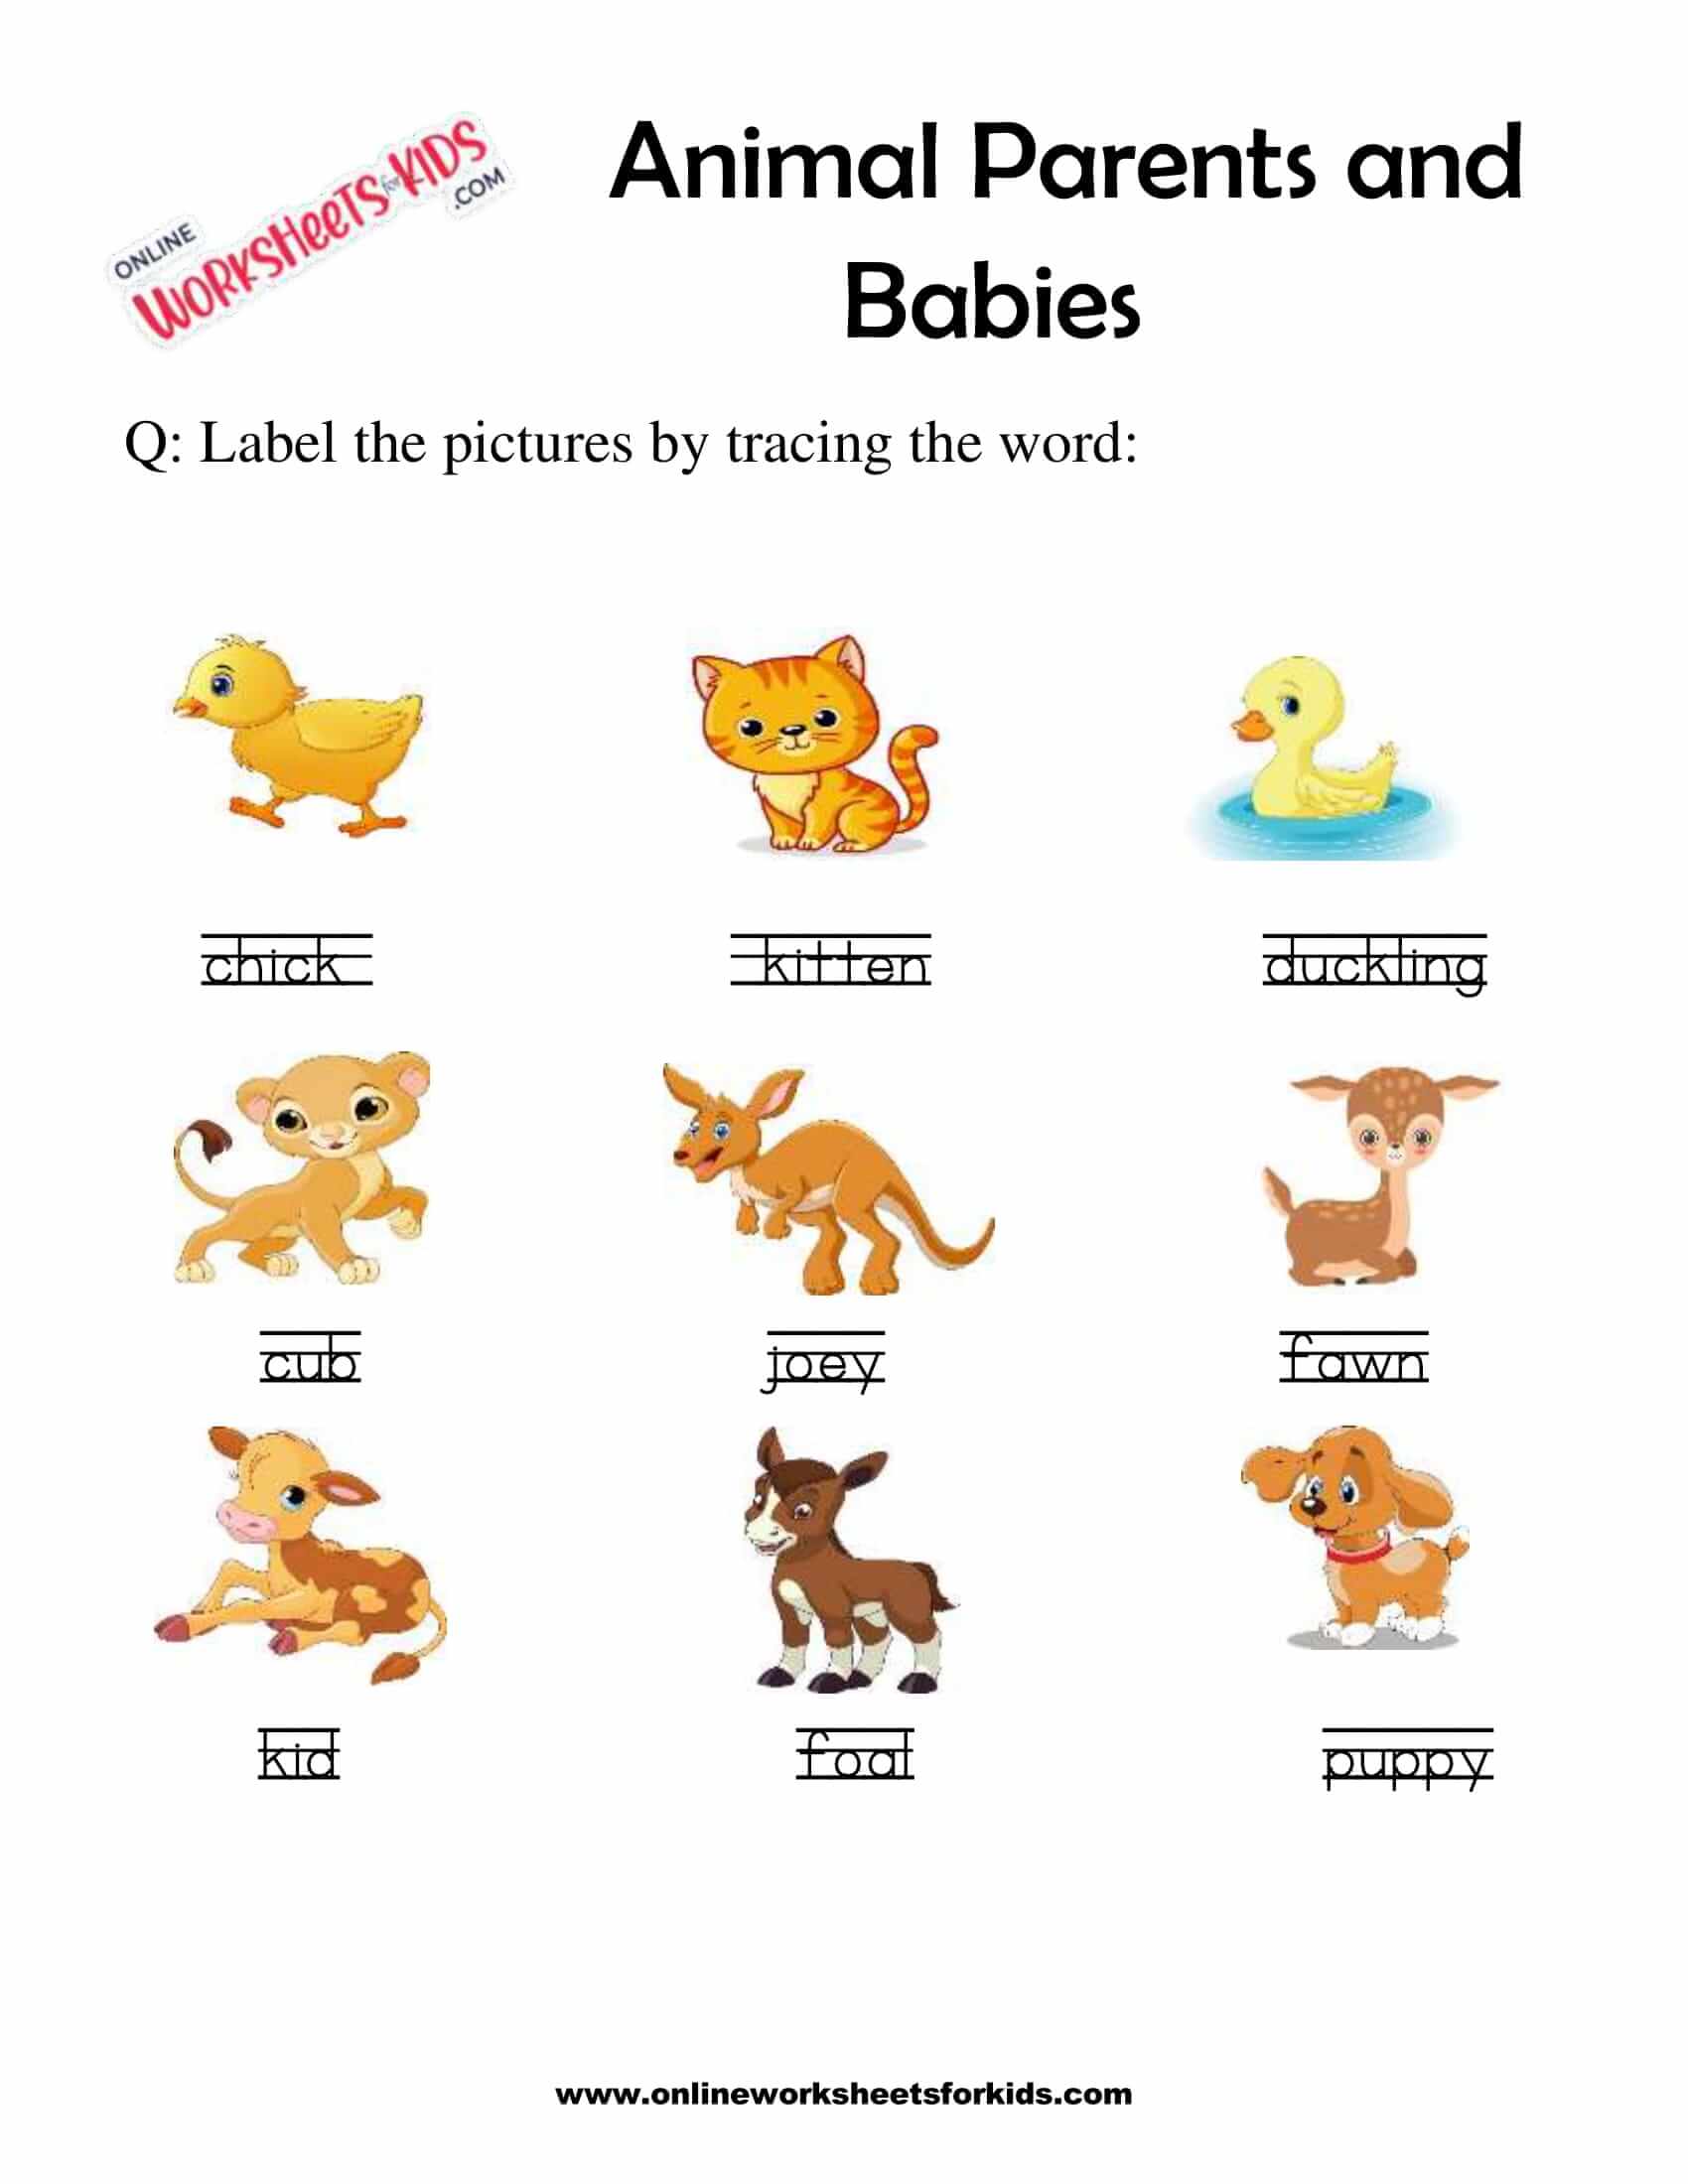 Animals and their Babies Worksheet Printable for Grade 1